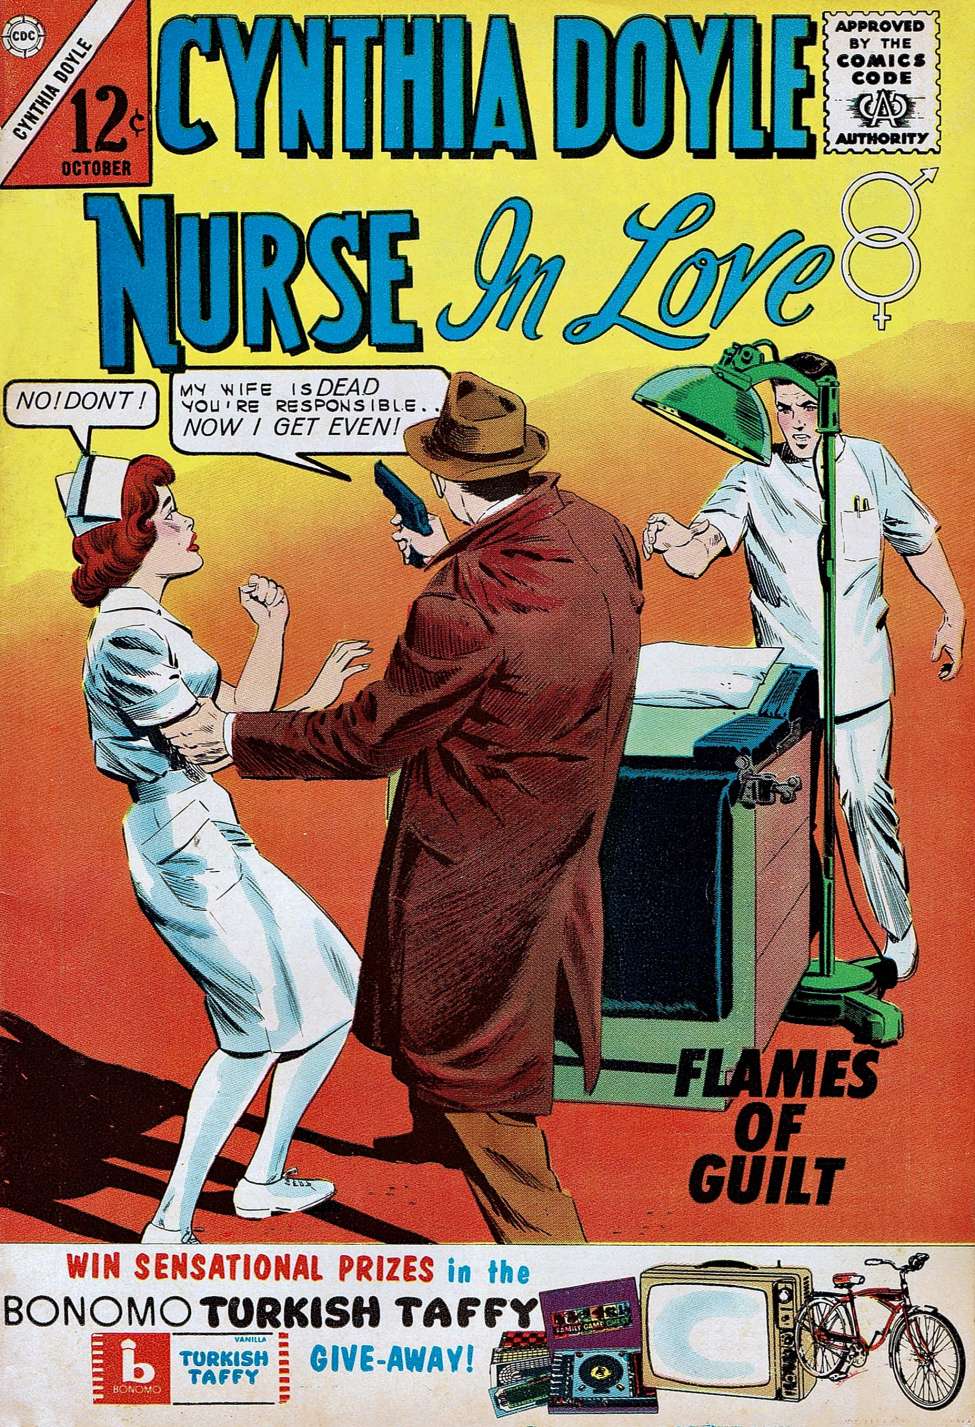 Book Cover For Cynthia Doyle, Nurse in Love 72